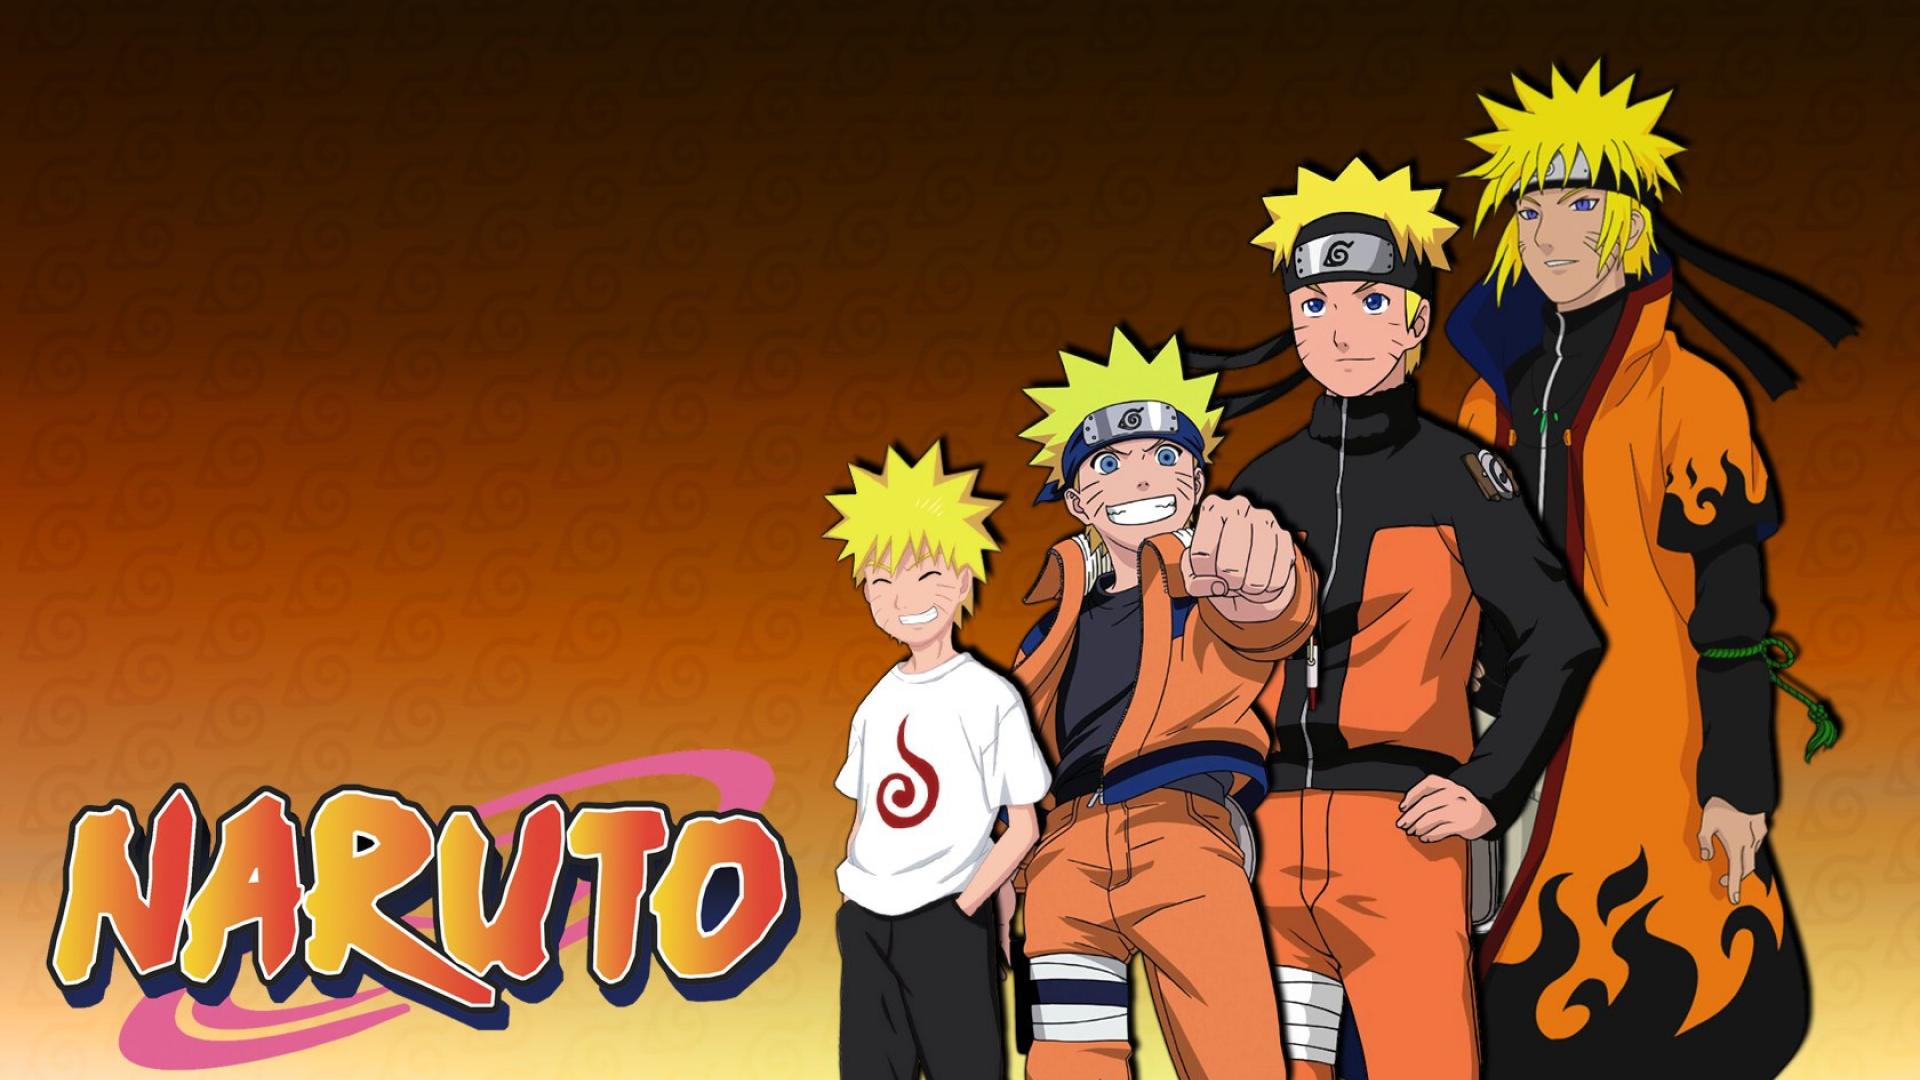 Naruto wallpaper 1680x1050 - (#27364) - High Quality and ...